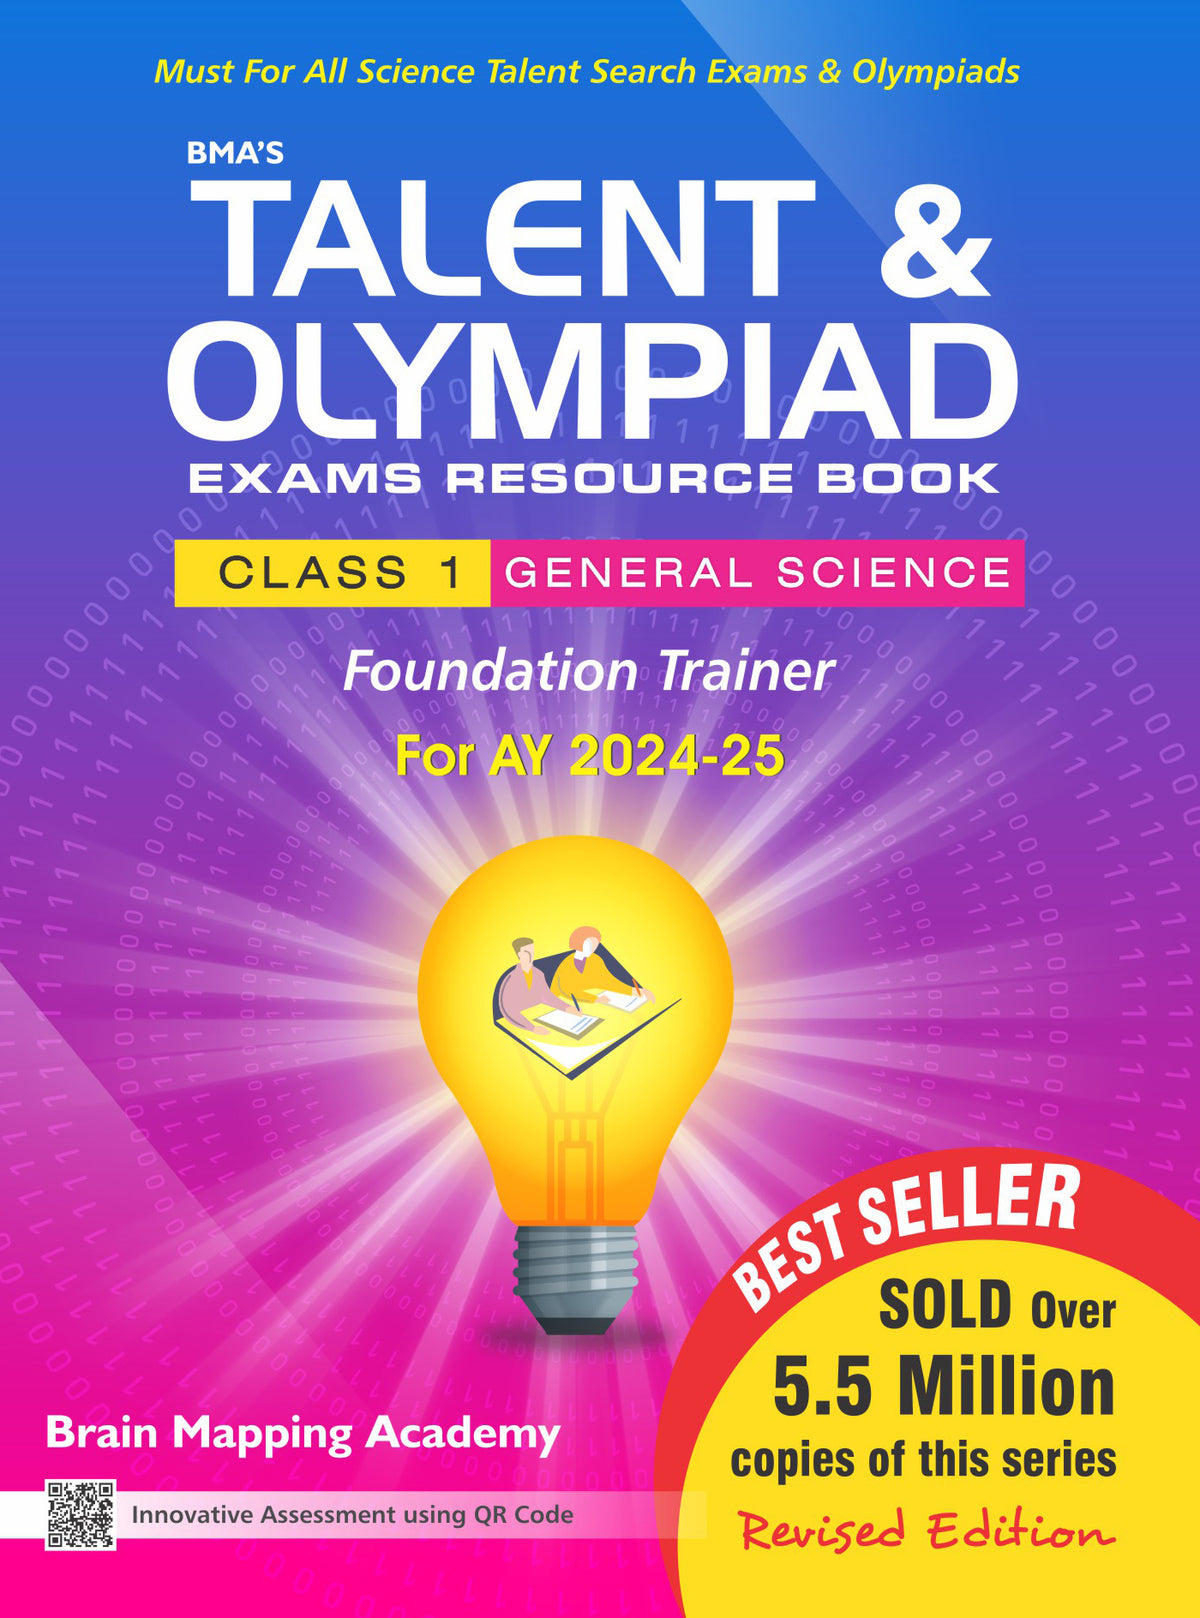 BMA's Talent & Olympiad Exam Resource Book for Class-1 (General Science)